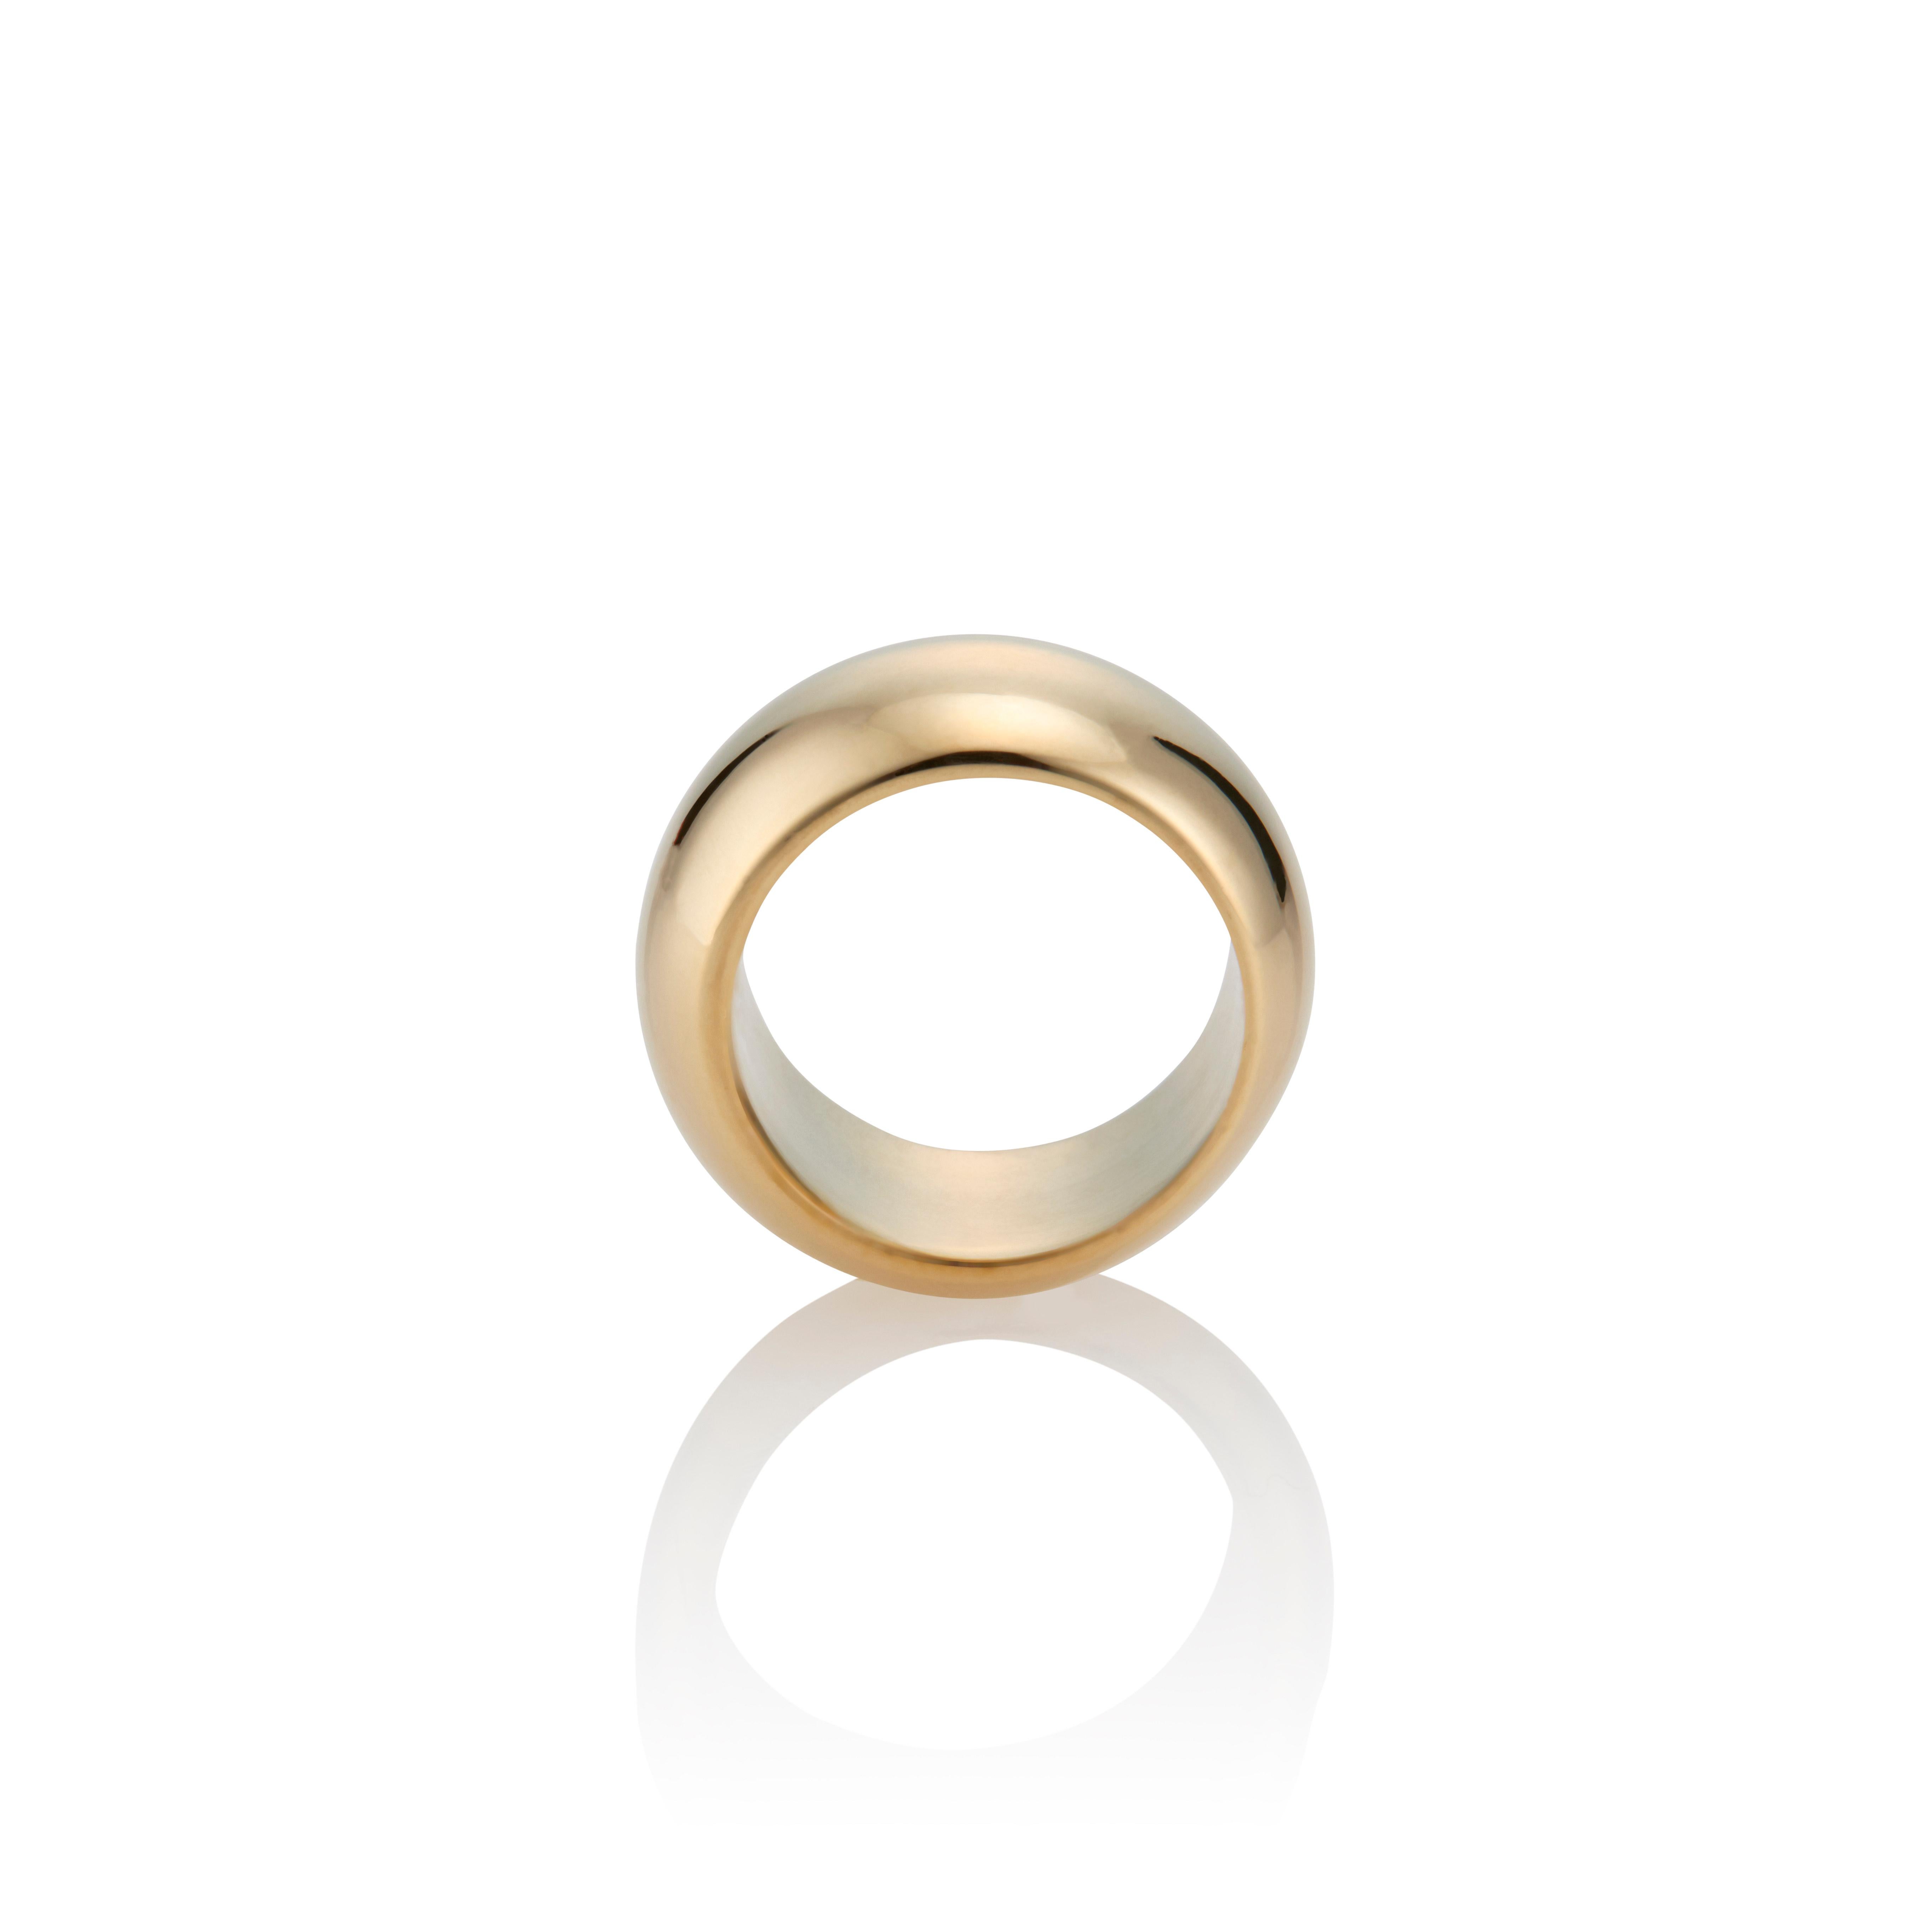 Every day fun design, this 22 Karat Gold Vermeil Puffy Washer Ring is a spin on a classic shape, designed for the modern jewelry lover who appreciates timeless pieces with a sophisticated edge.  

Size 6- Ring Size is customizable.

All items are